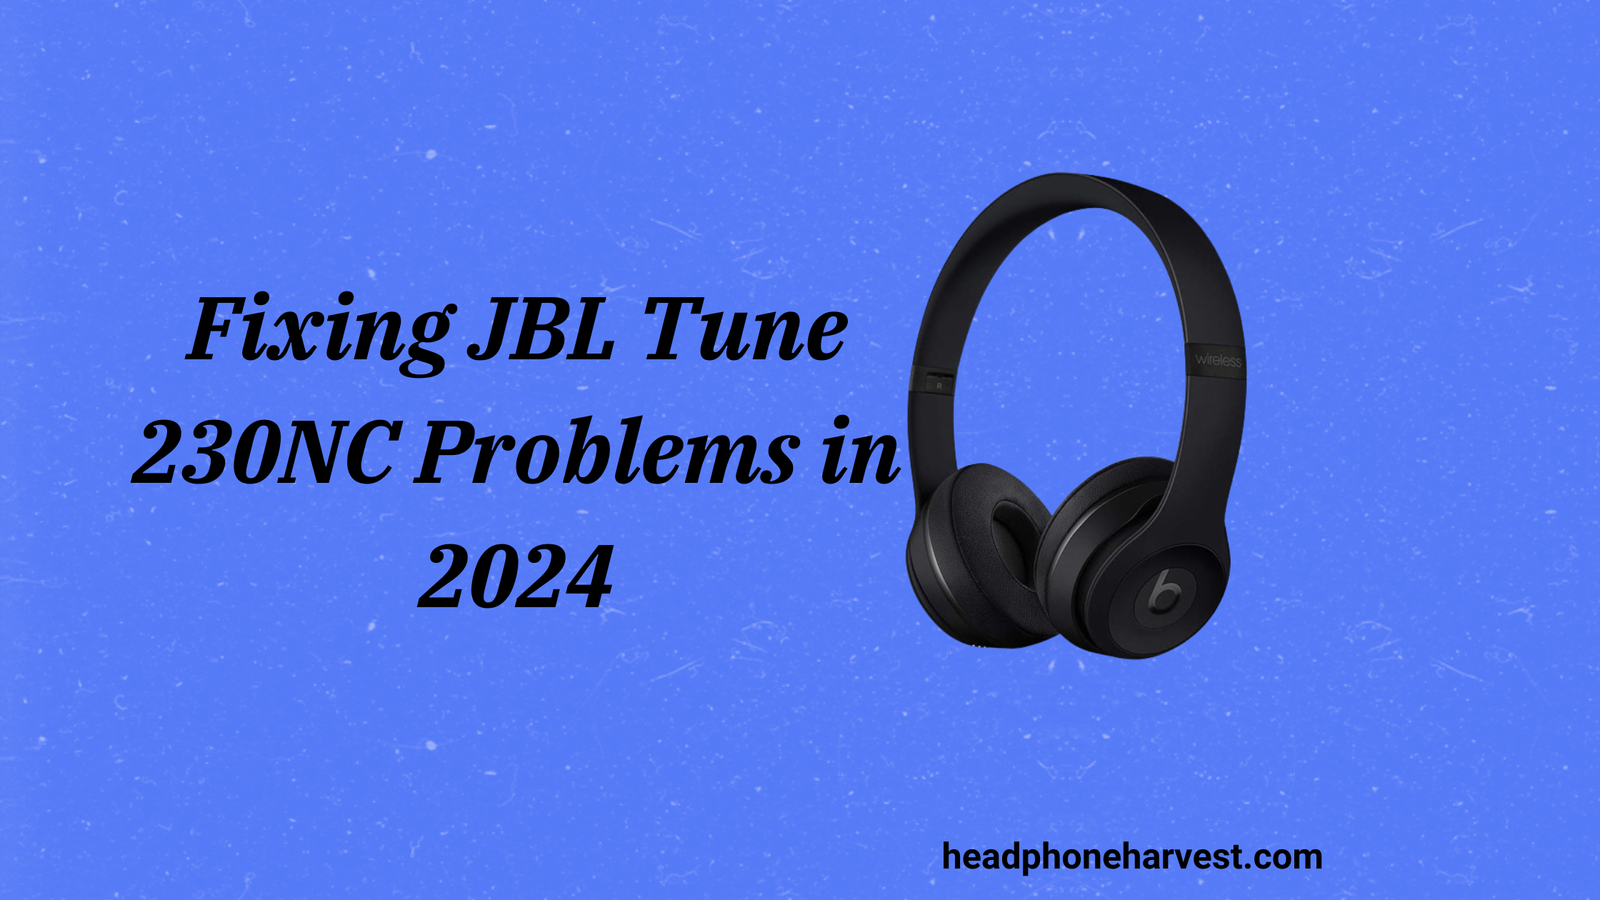 Fixing JBL Tune 230NC Problems in 2024